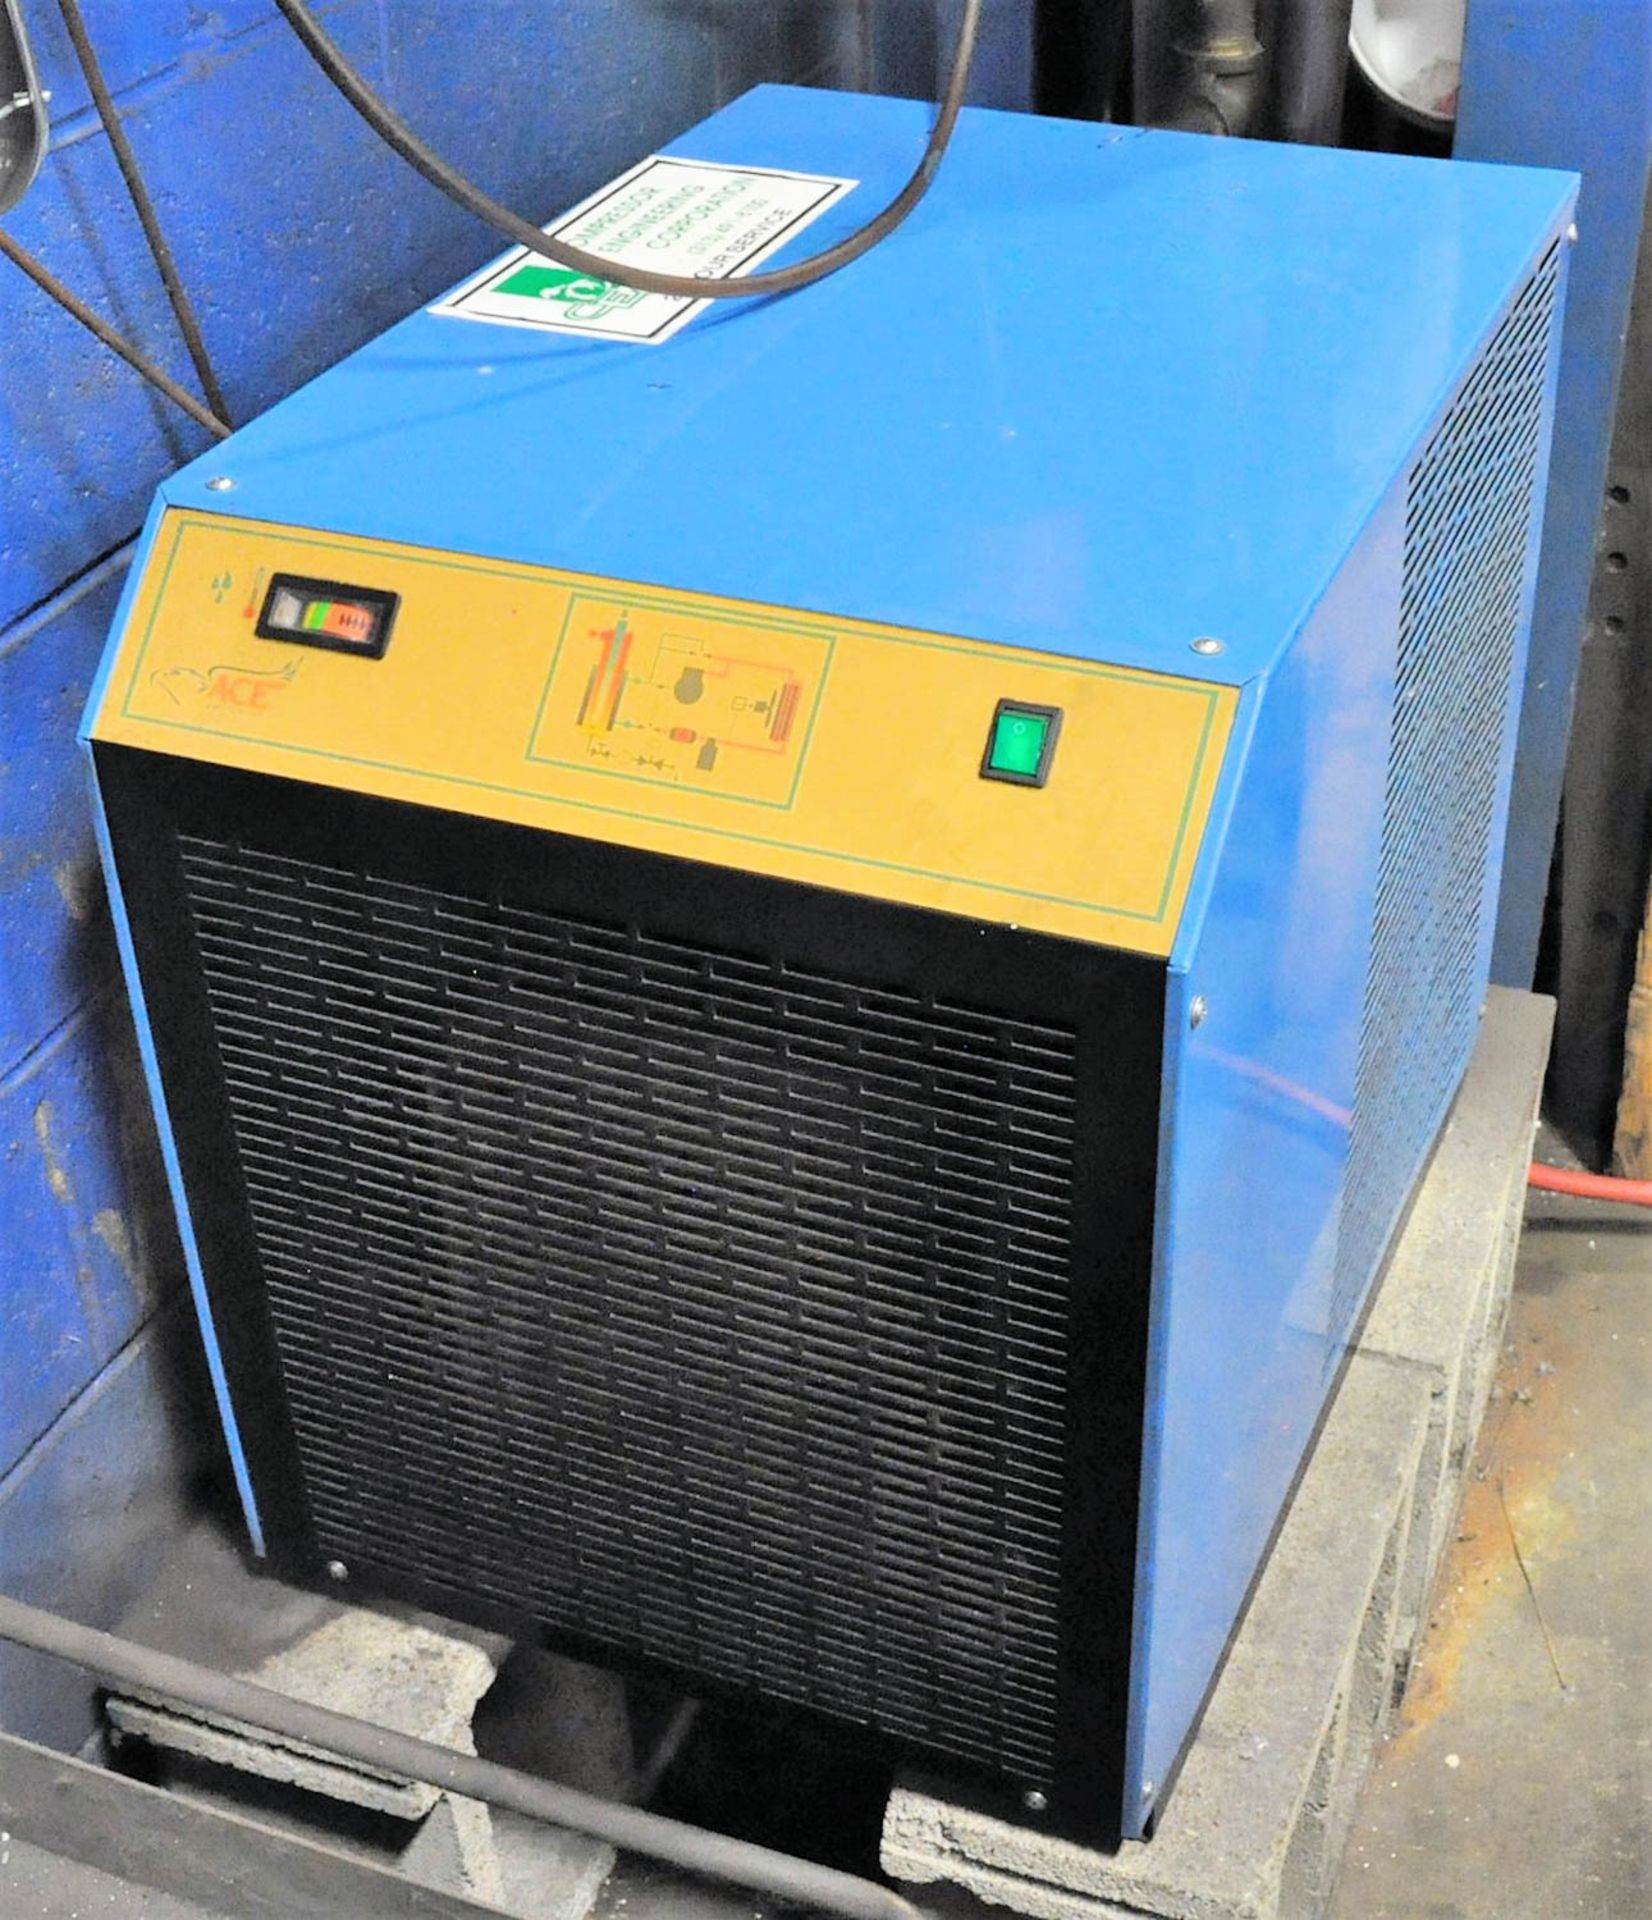 Ace Purification Mdl. MAR125 Refrigerated Compressed Air Dryer, S/N: 45-04-MA2210